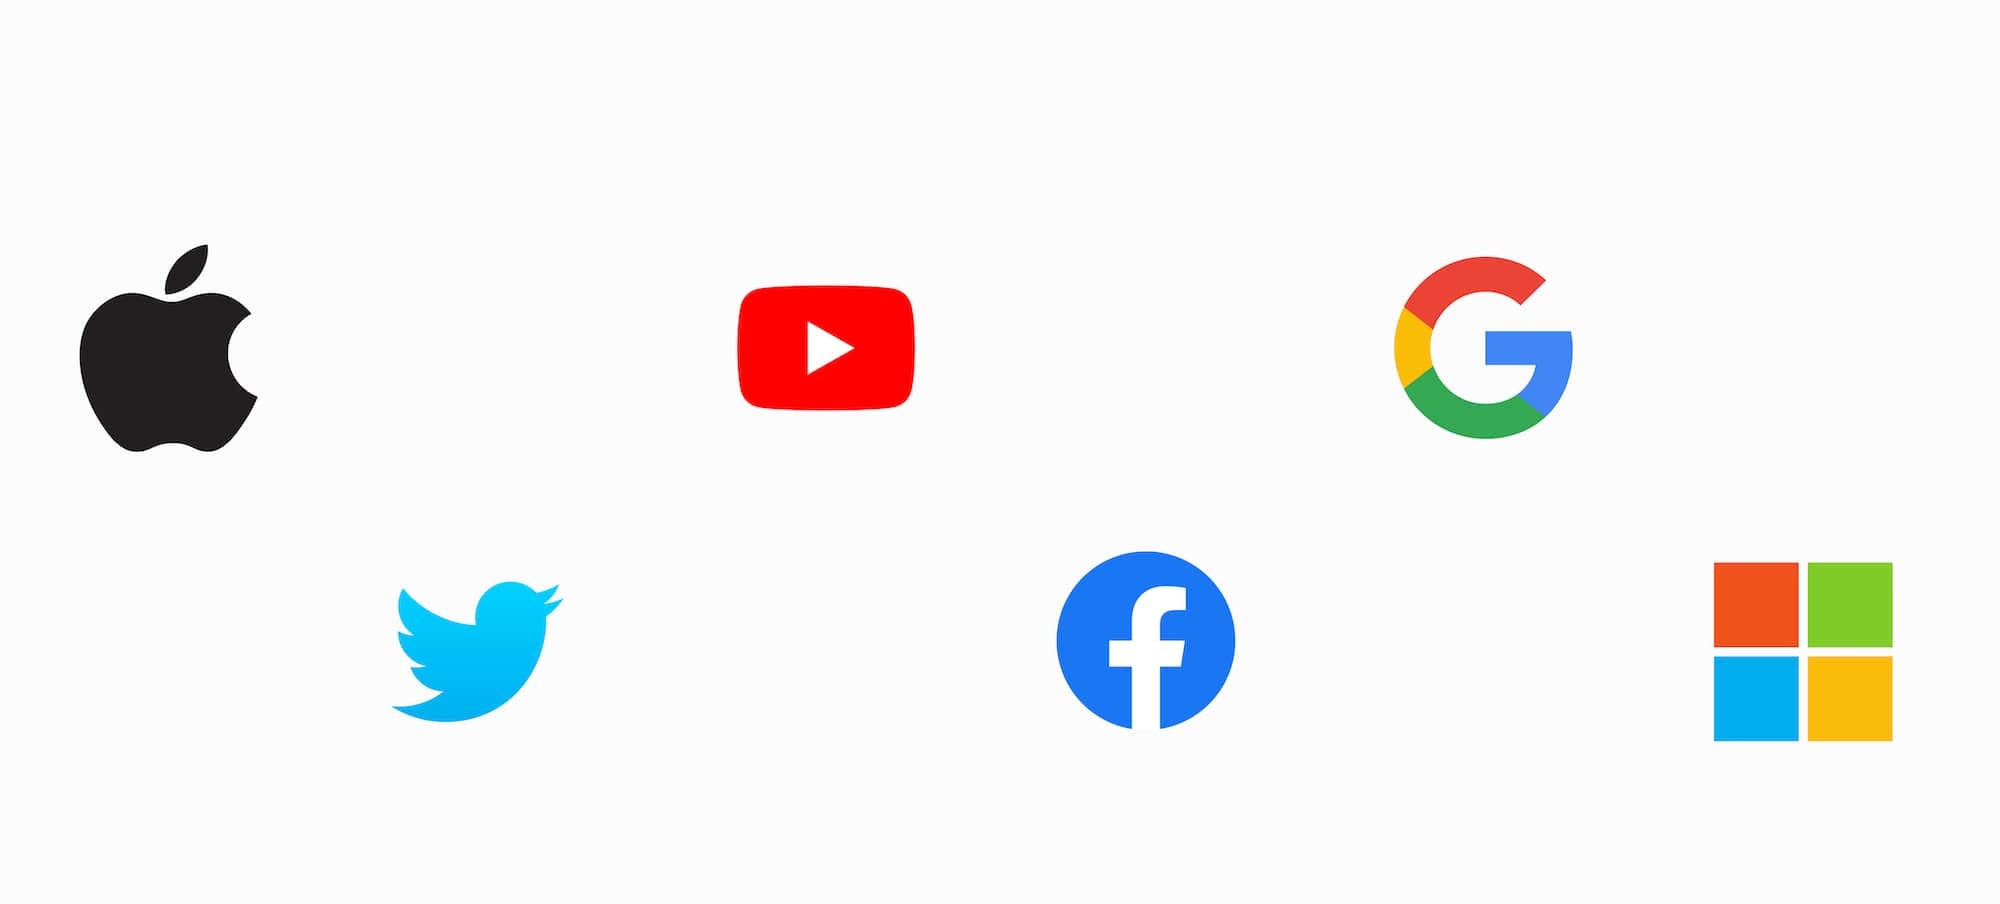 Brand symbols for Apple, Twitter, YouTube, Facebook, Google, and Microsoft